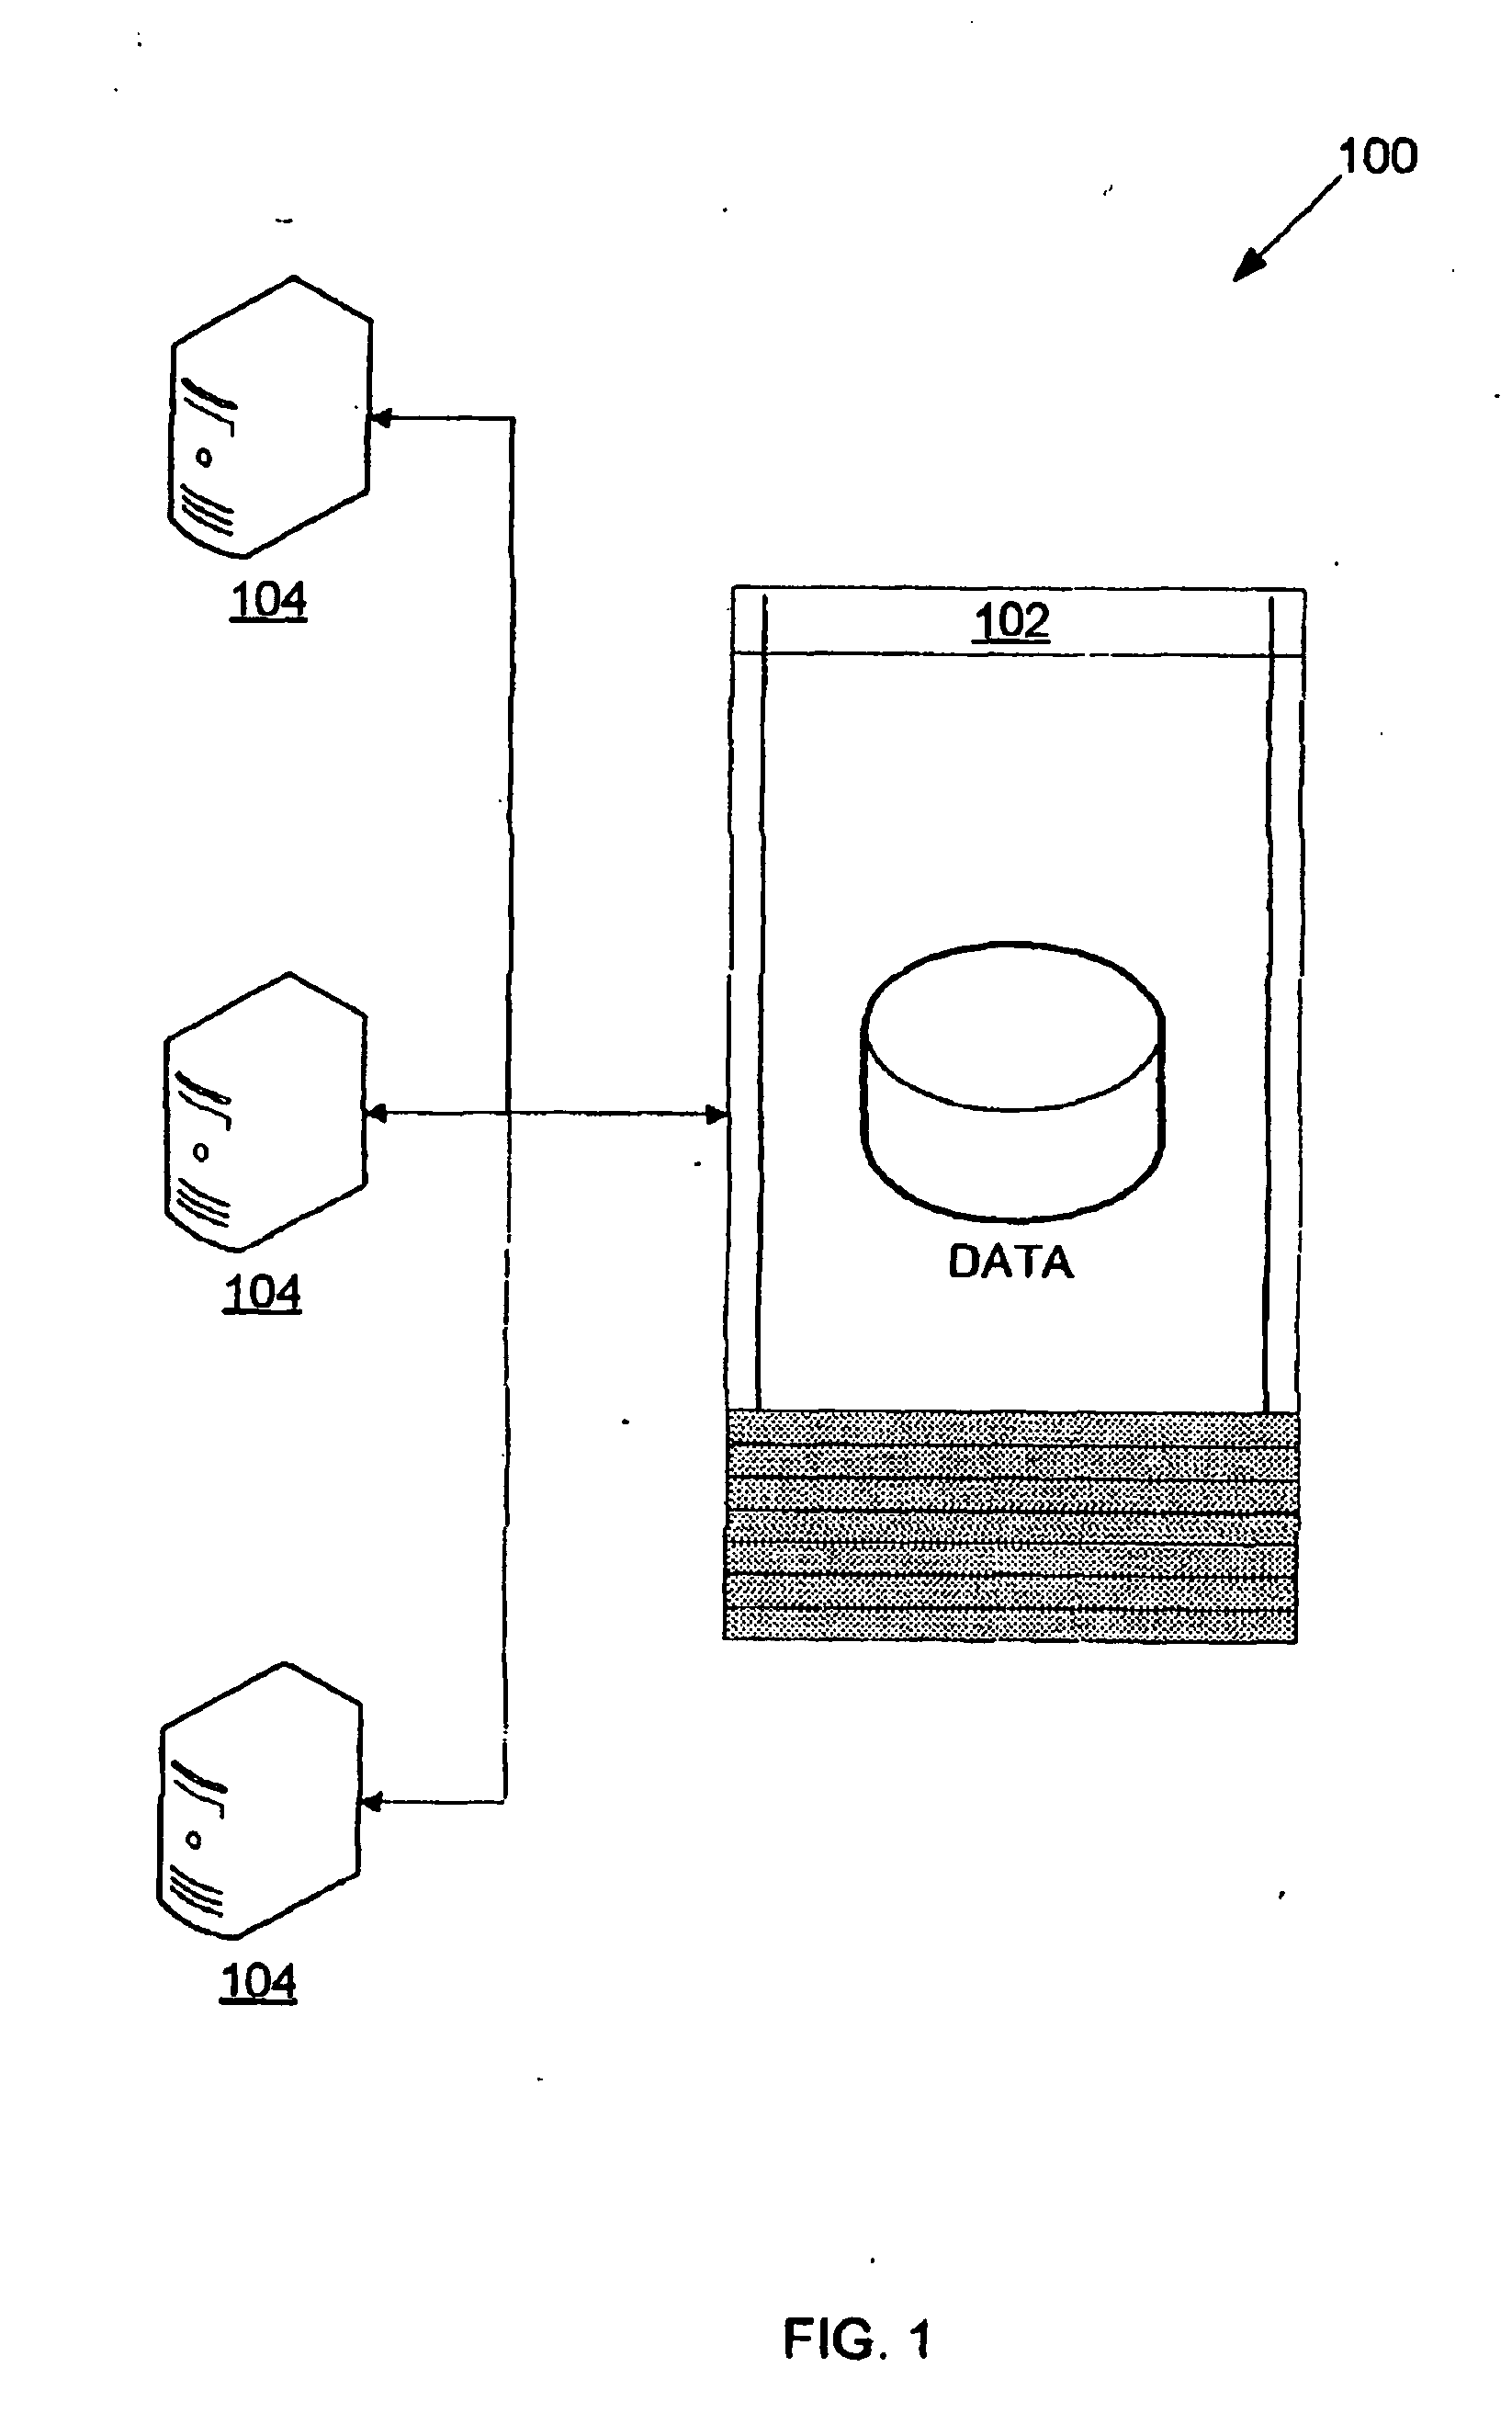 System and method for predicting card member spending using collaborative filtering